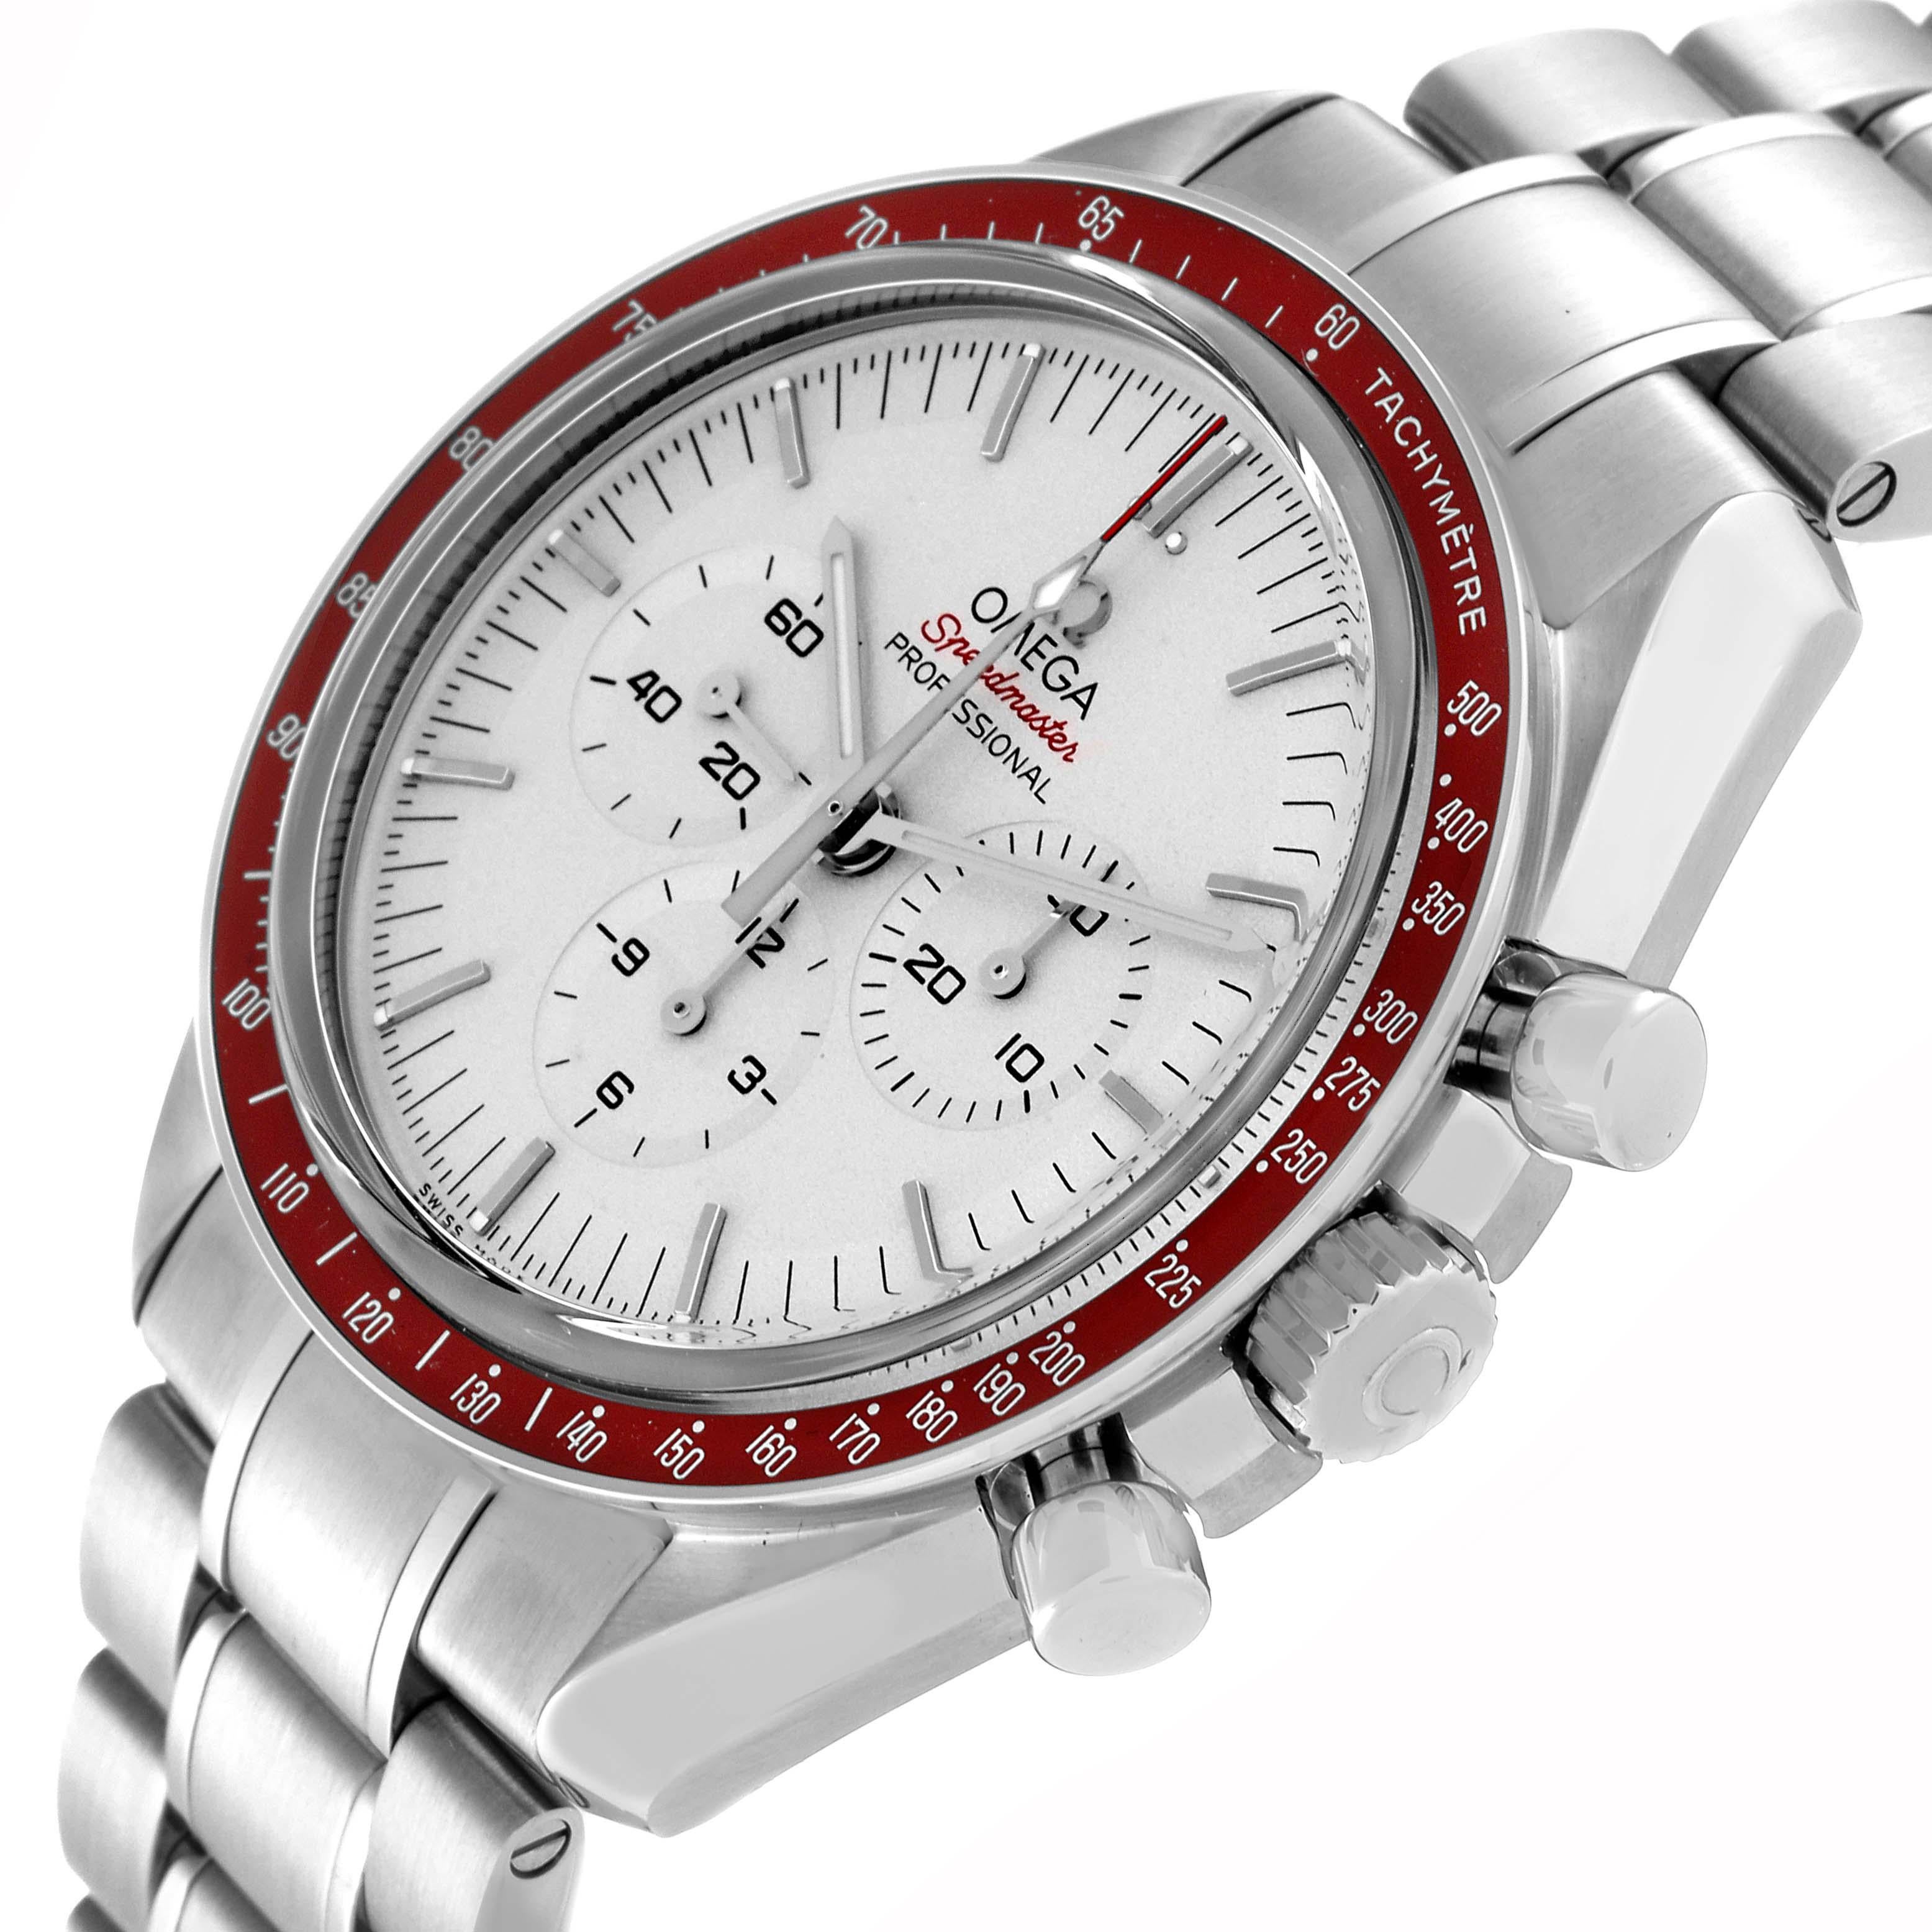 Omega Speedmaster Tokyo 2020 Olympics LE Mens Watch 522.30.42.30.06.001 Unworn. Manual winding chronograph movement. Stainless steel round case 42.0 mm in diameter. Case back engraved with Tokyo Olympics 2020 logo. Stainless steel bezel with red